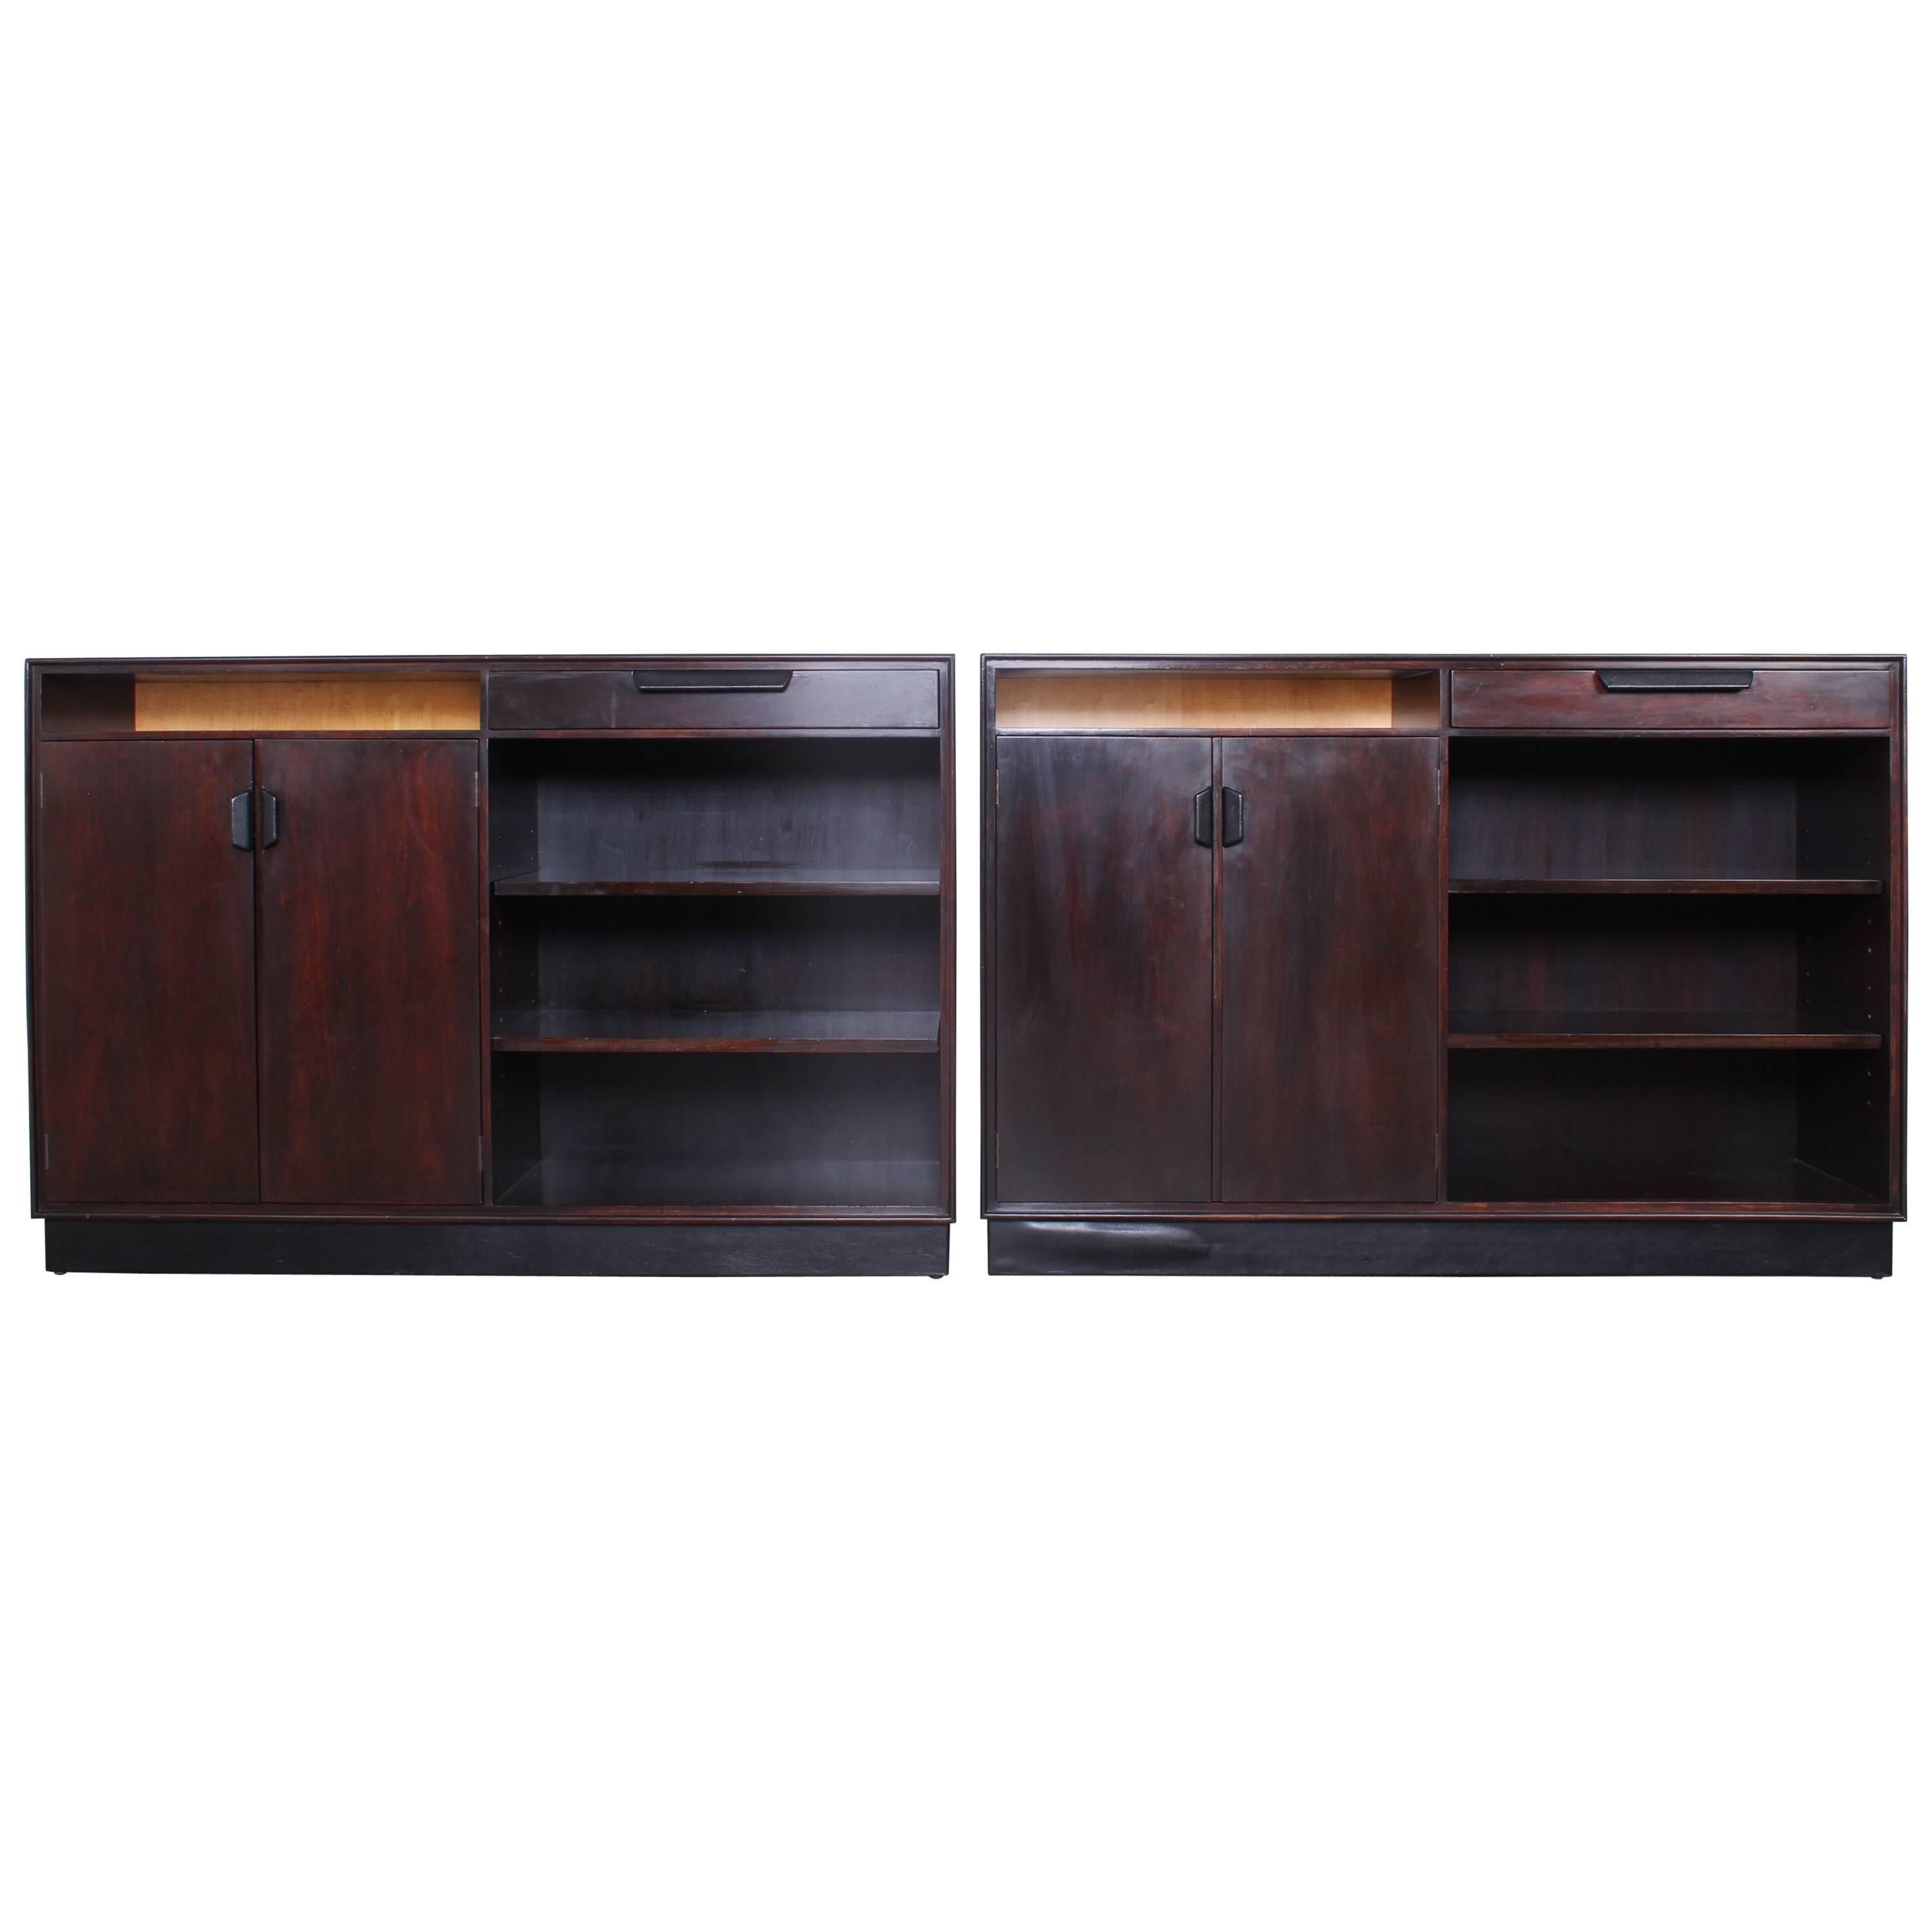 Pair of Bookcases by Edward Wormley for Dunbar